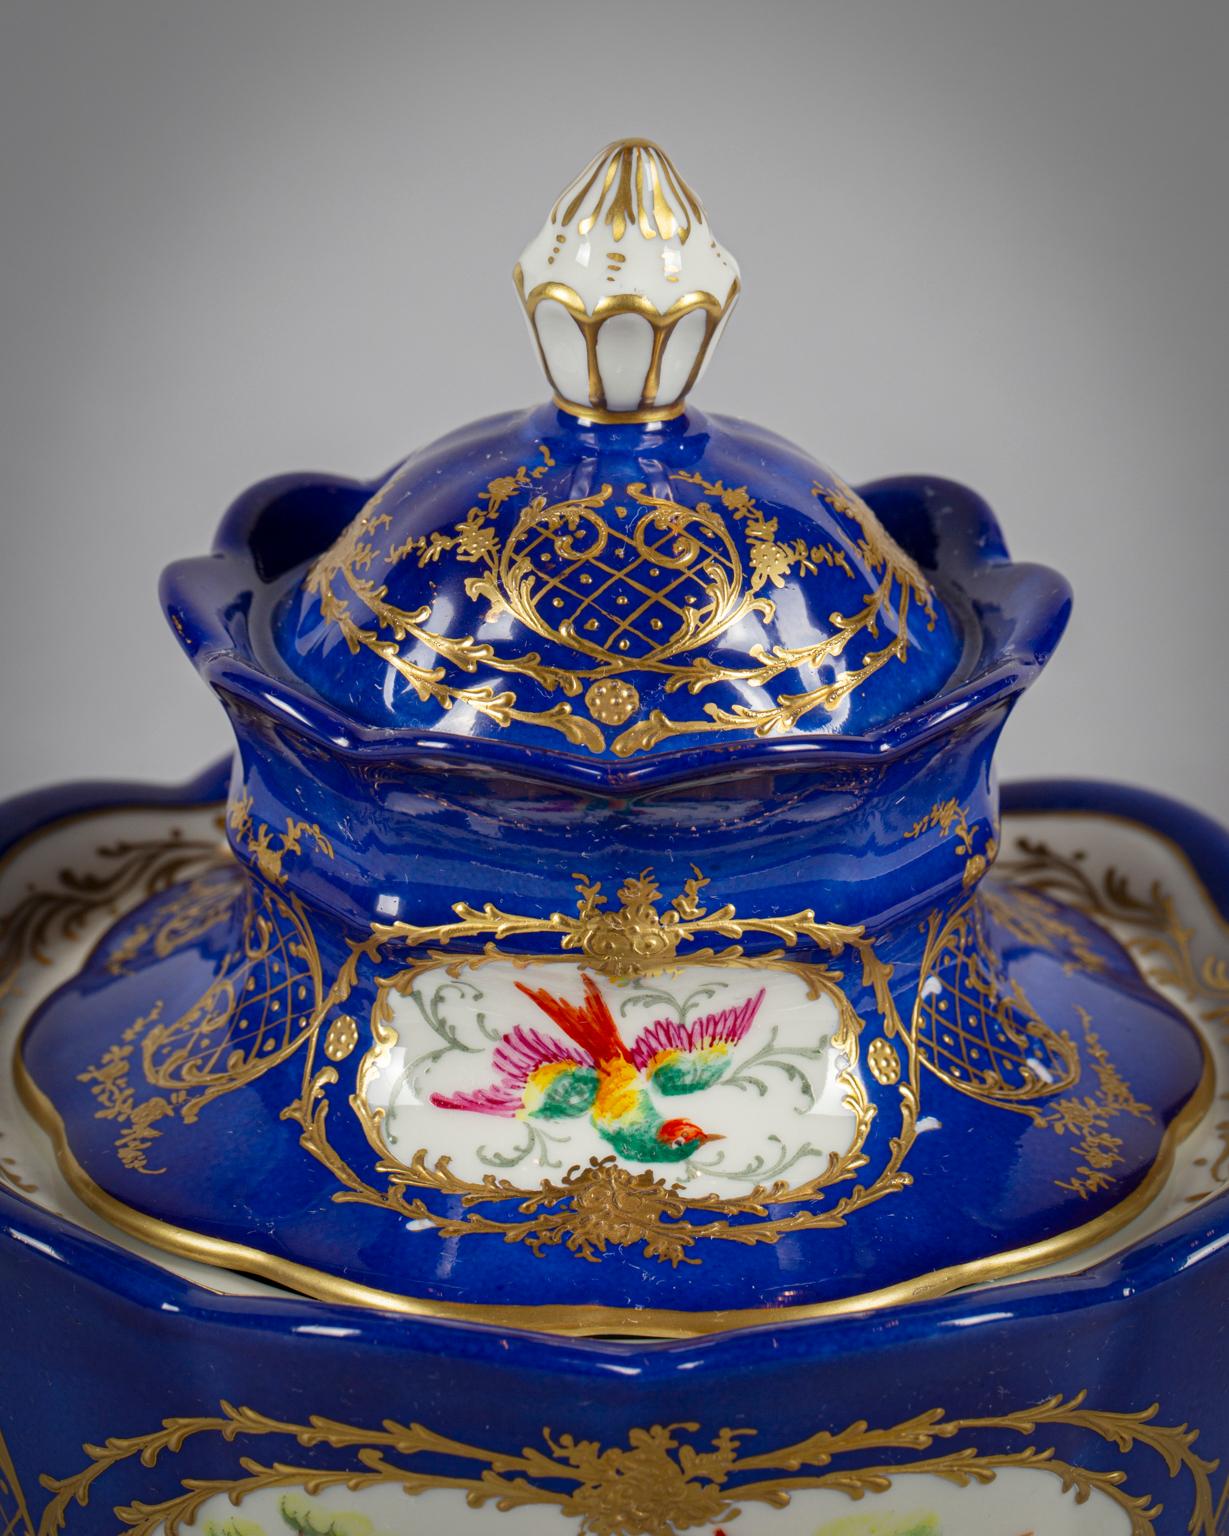 Pair of French Porcelain Covered Sauce Tureens on Stands, Le Tallec, Dated 1984 For Sale 3